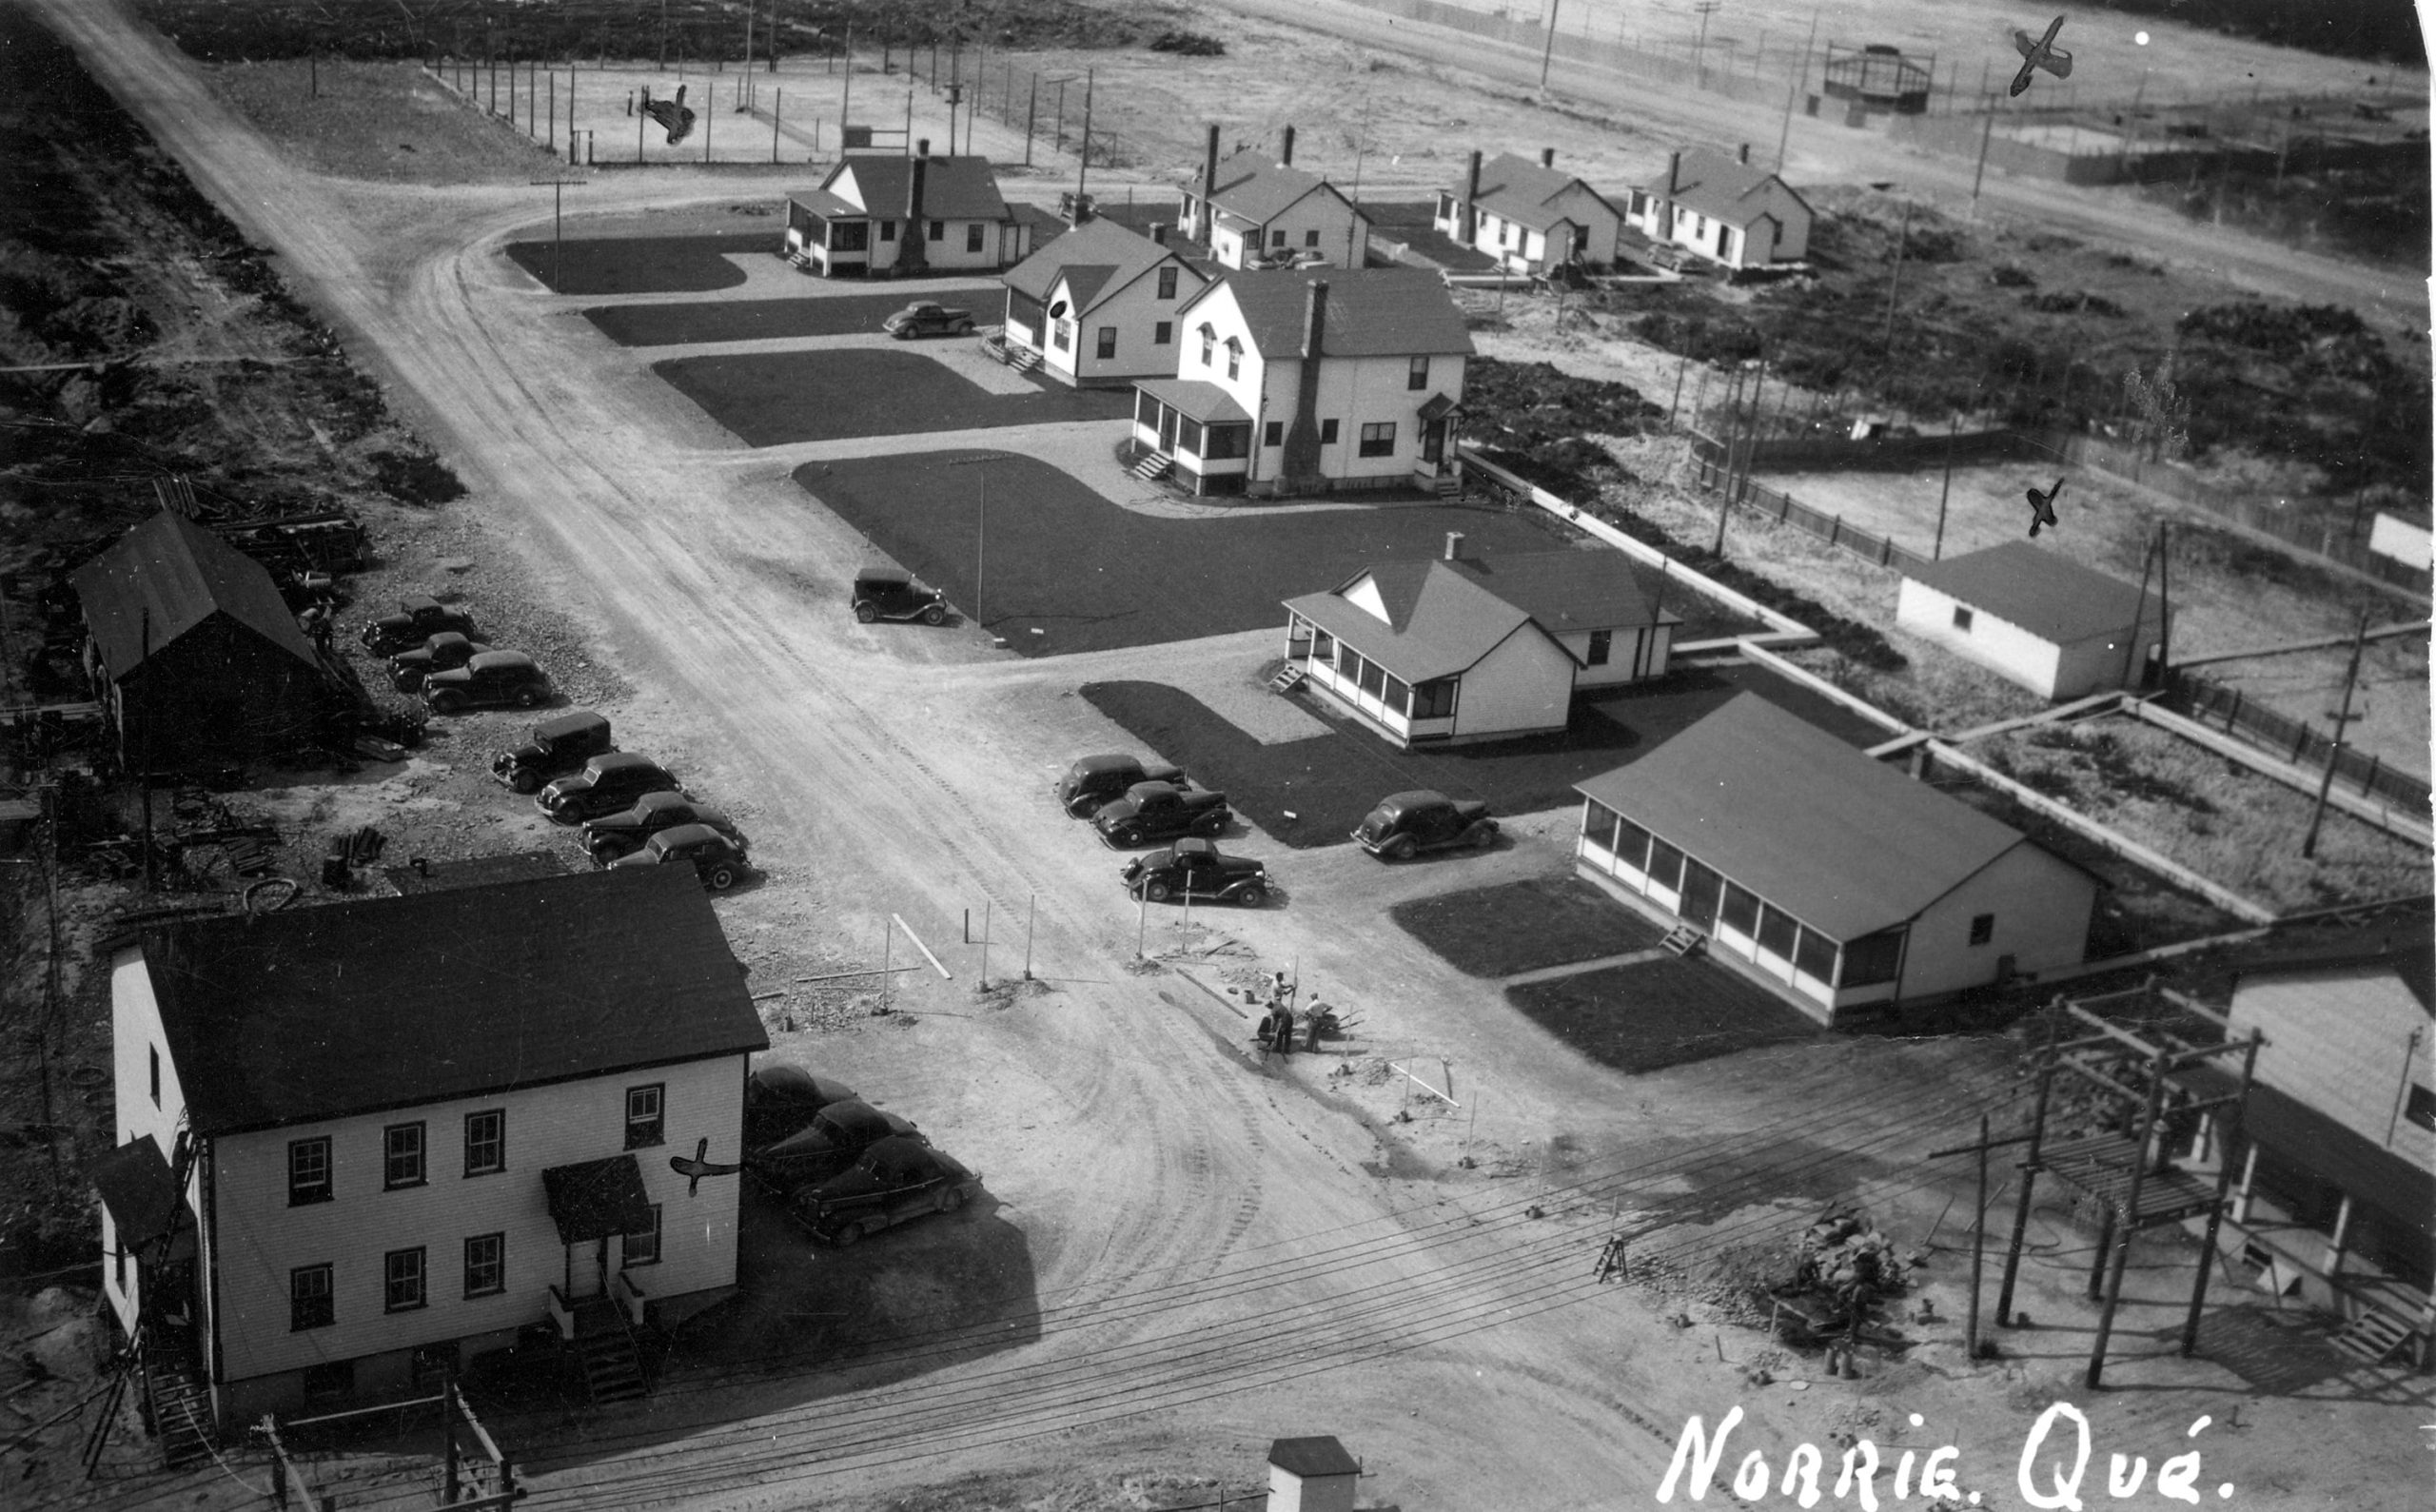 Black and white photograph of a hamlet consisting of several modern buildings. Several cars are parked in front of well-manicured lawns. Several sports fields (baseball, hockey, and tennis) are also visible.